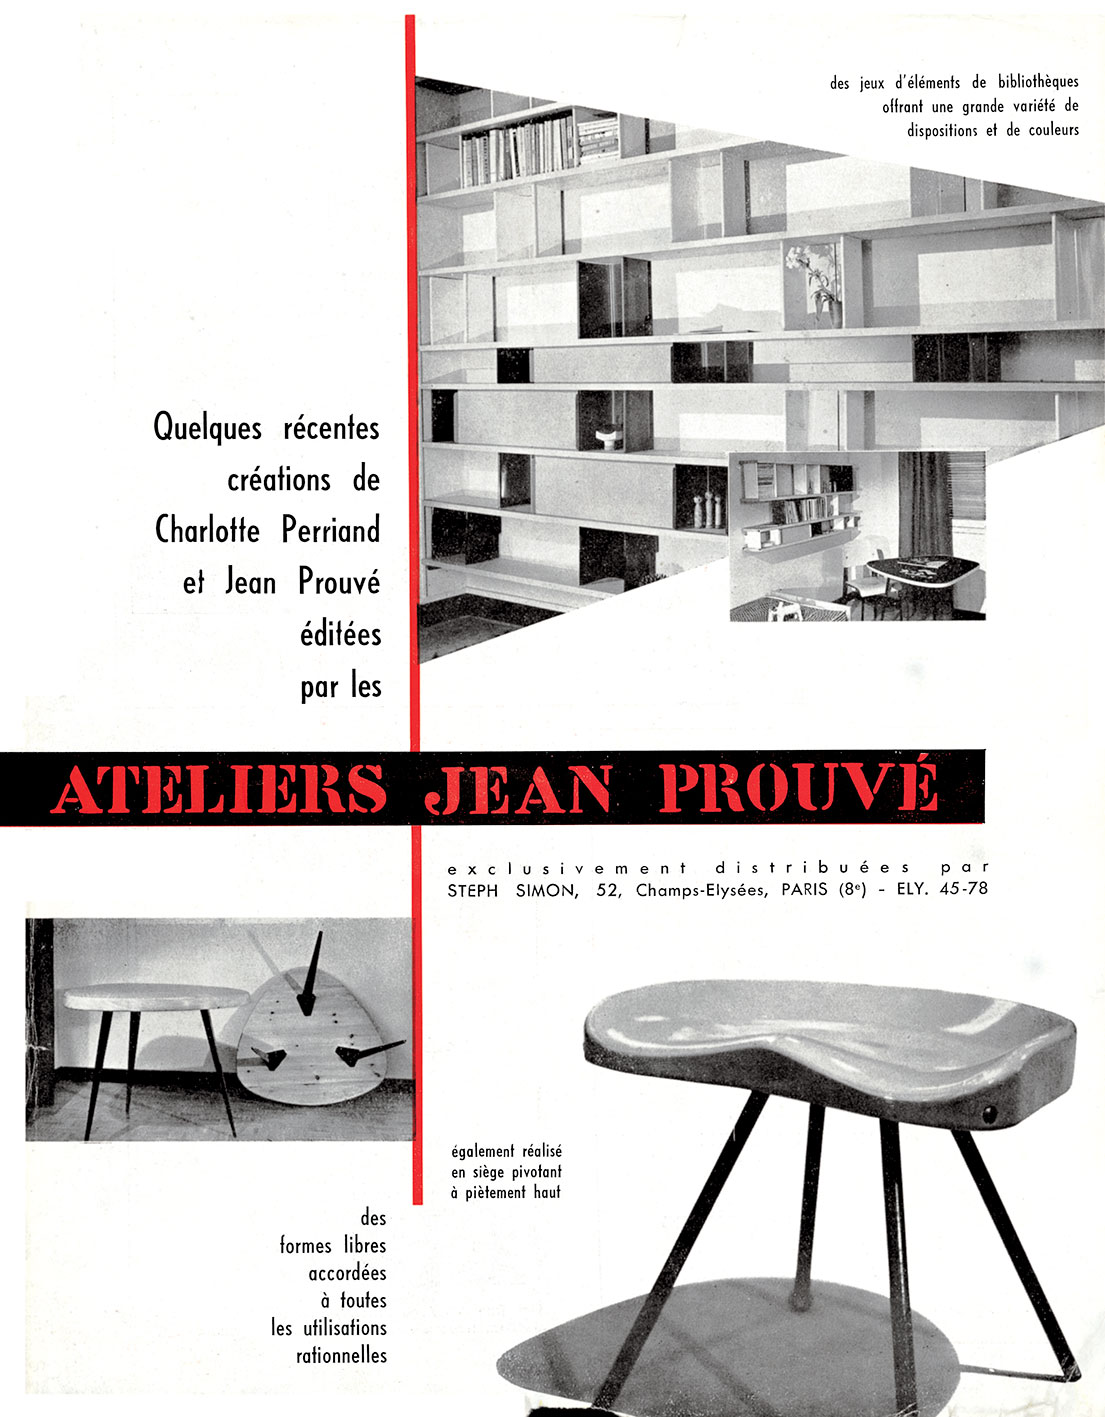 Advertisement from the Ateliers Jean Prouvé, in <i>L’Architecture d’aujourd’hui,</i> no. 46, February 1953.